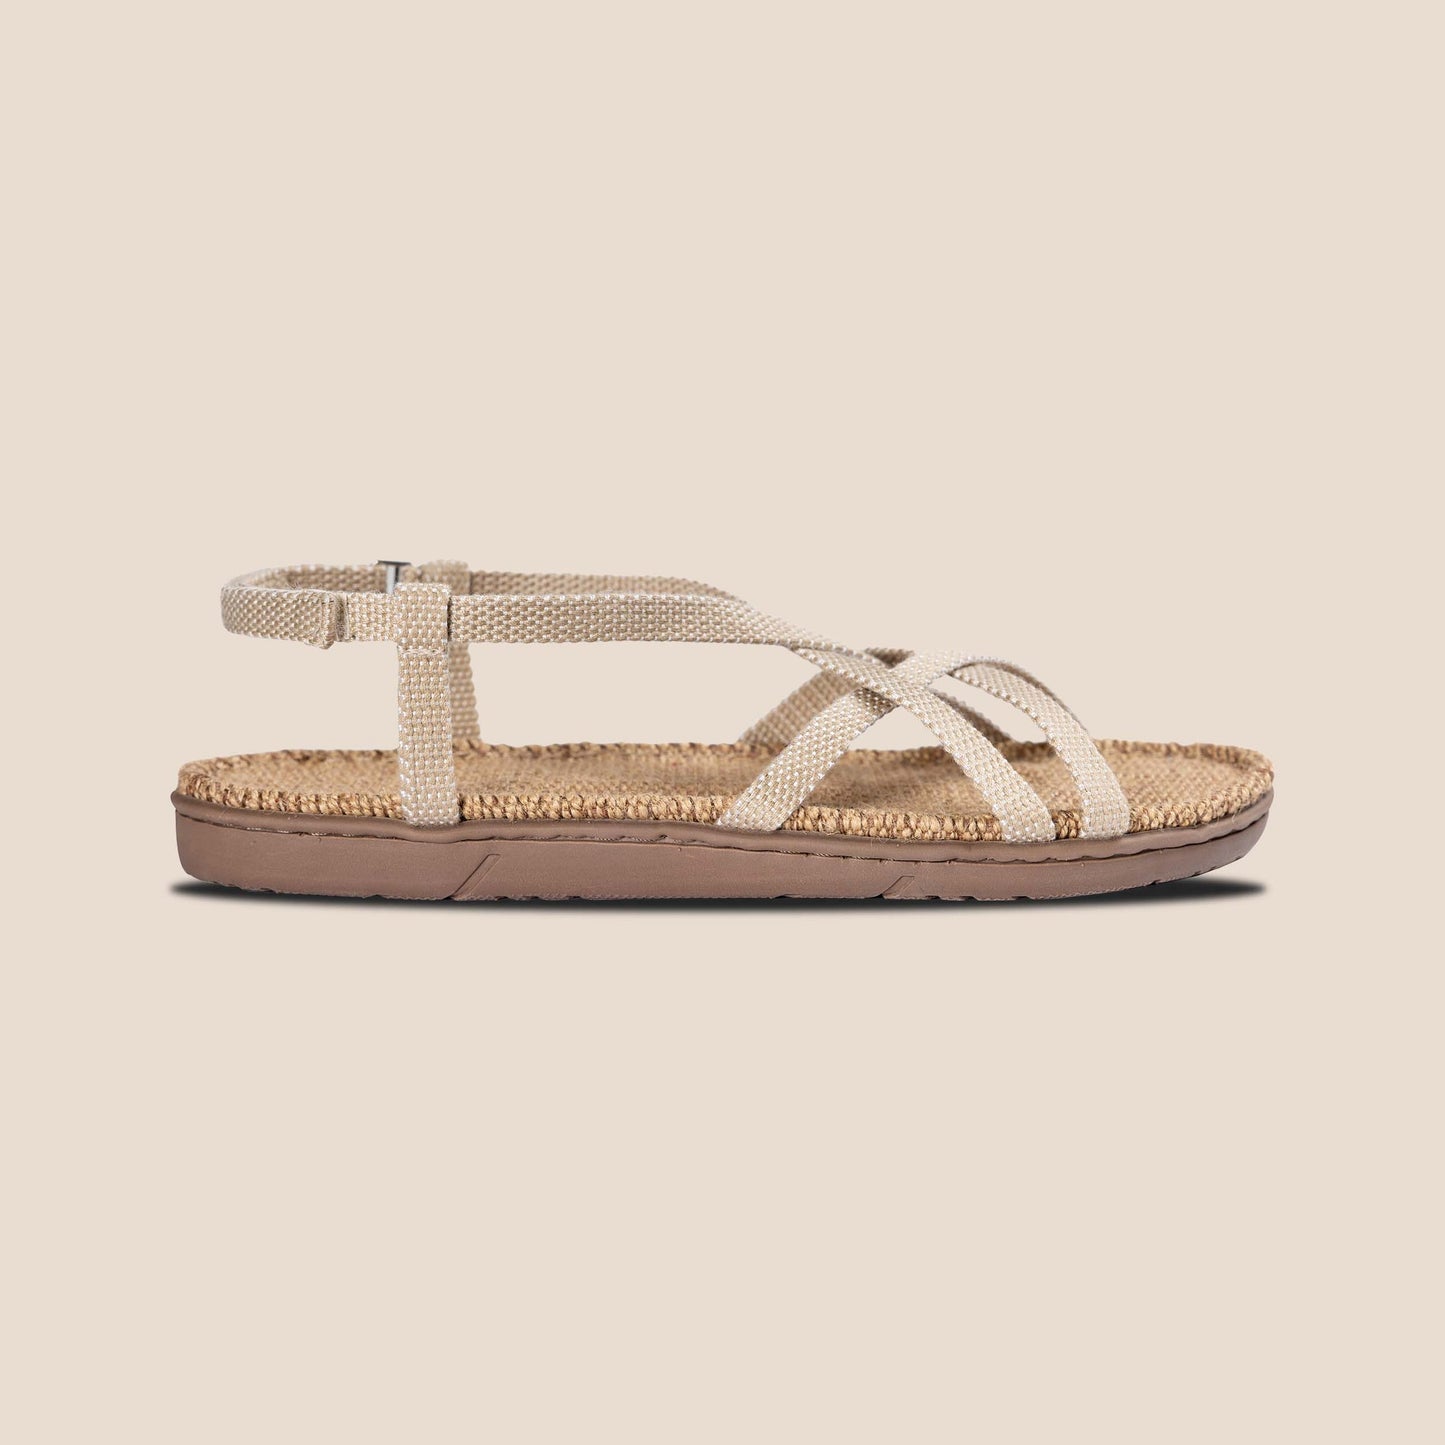 shangies sandals women#2 pearly shades